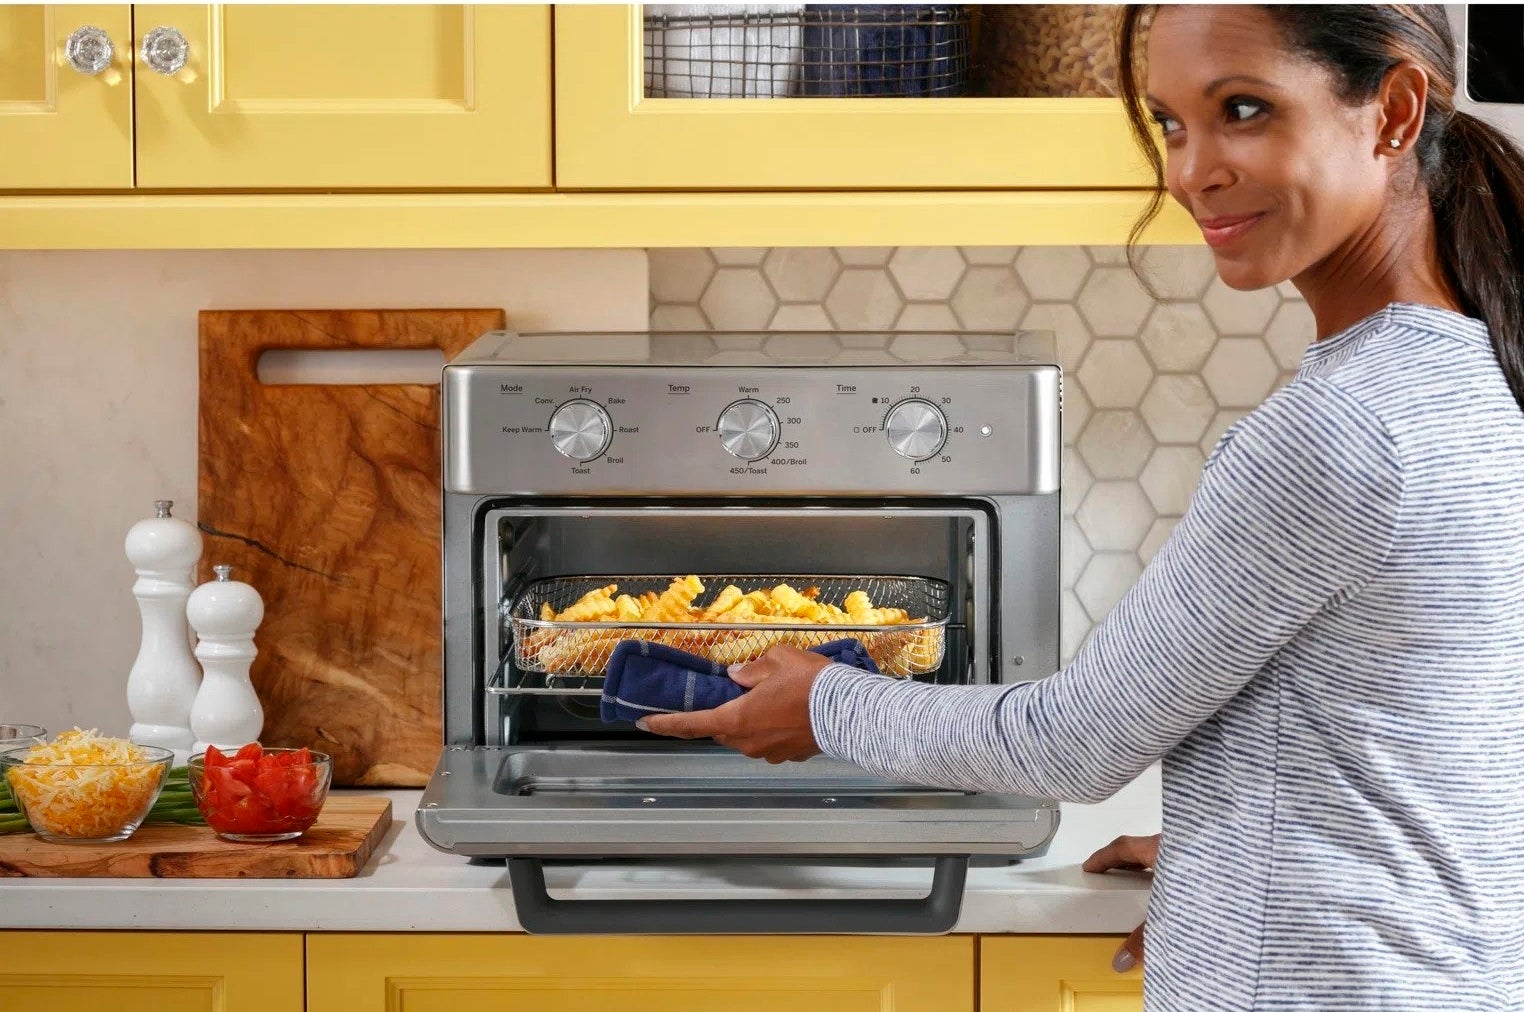 A model removing french fries from the toast oven, which has a wired basket